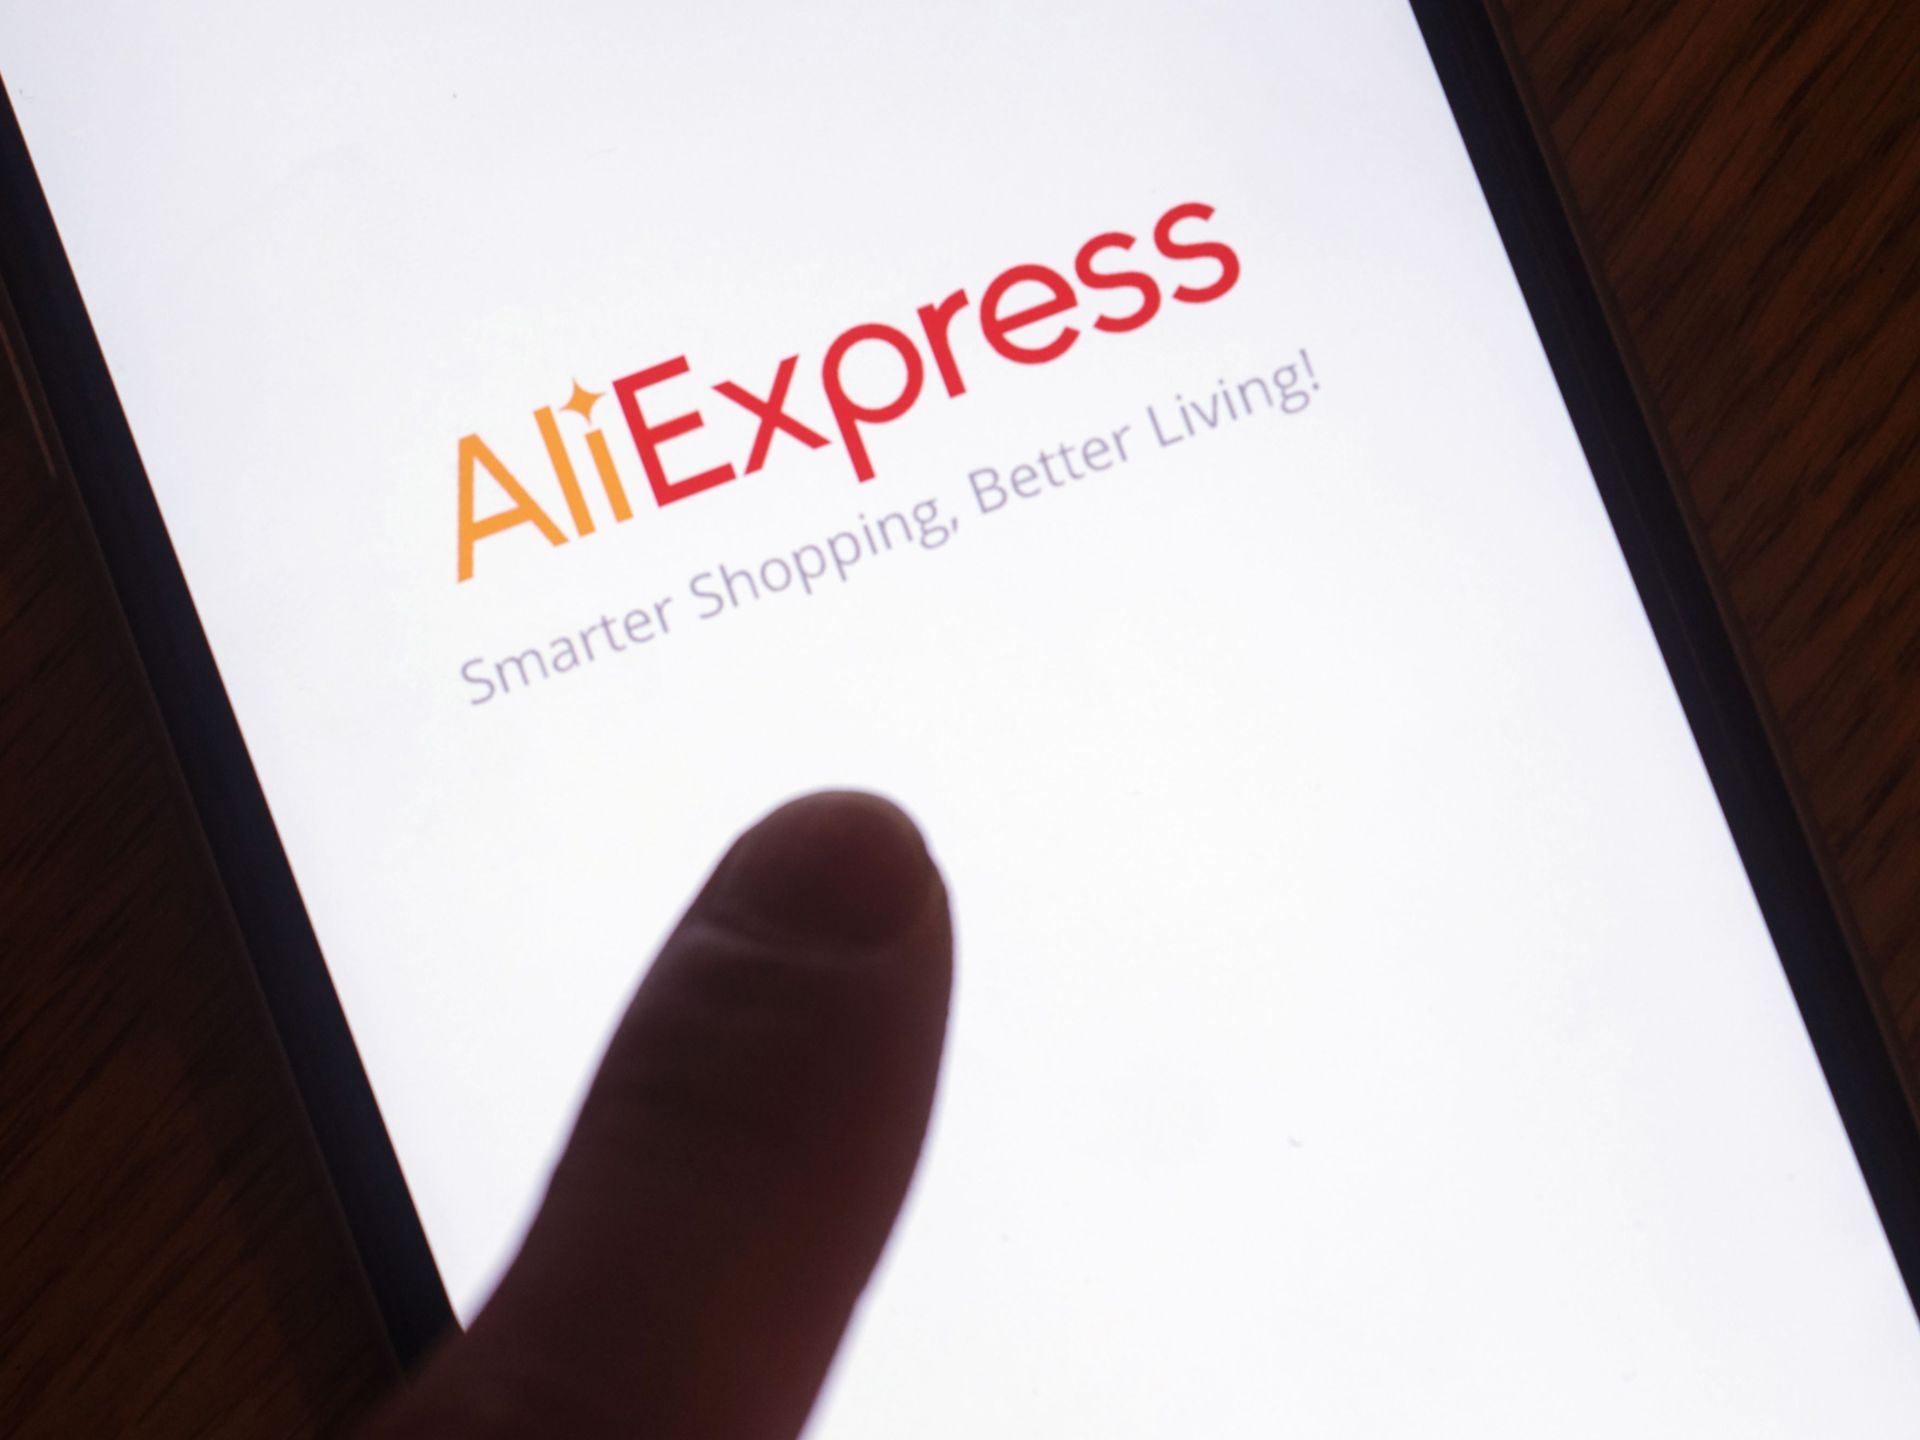 EU probes Chinese site AliExpress over potentially illegal online products | Technology News